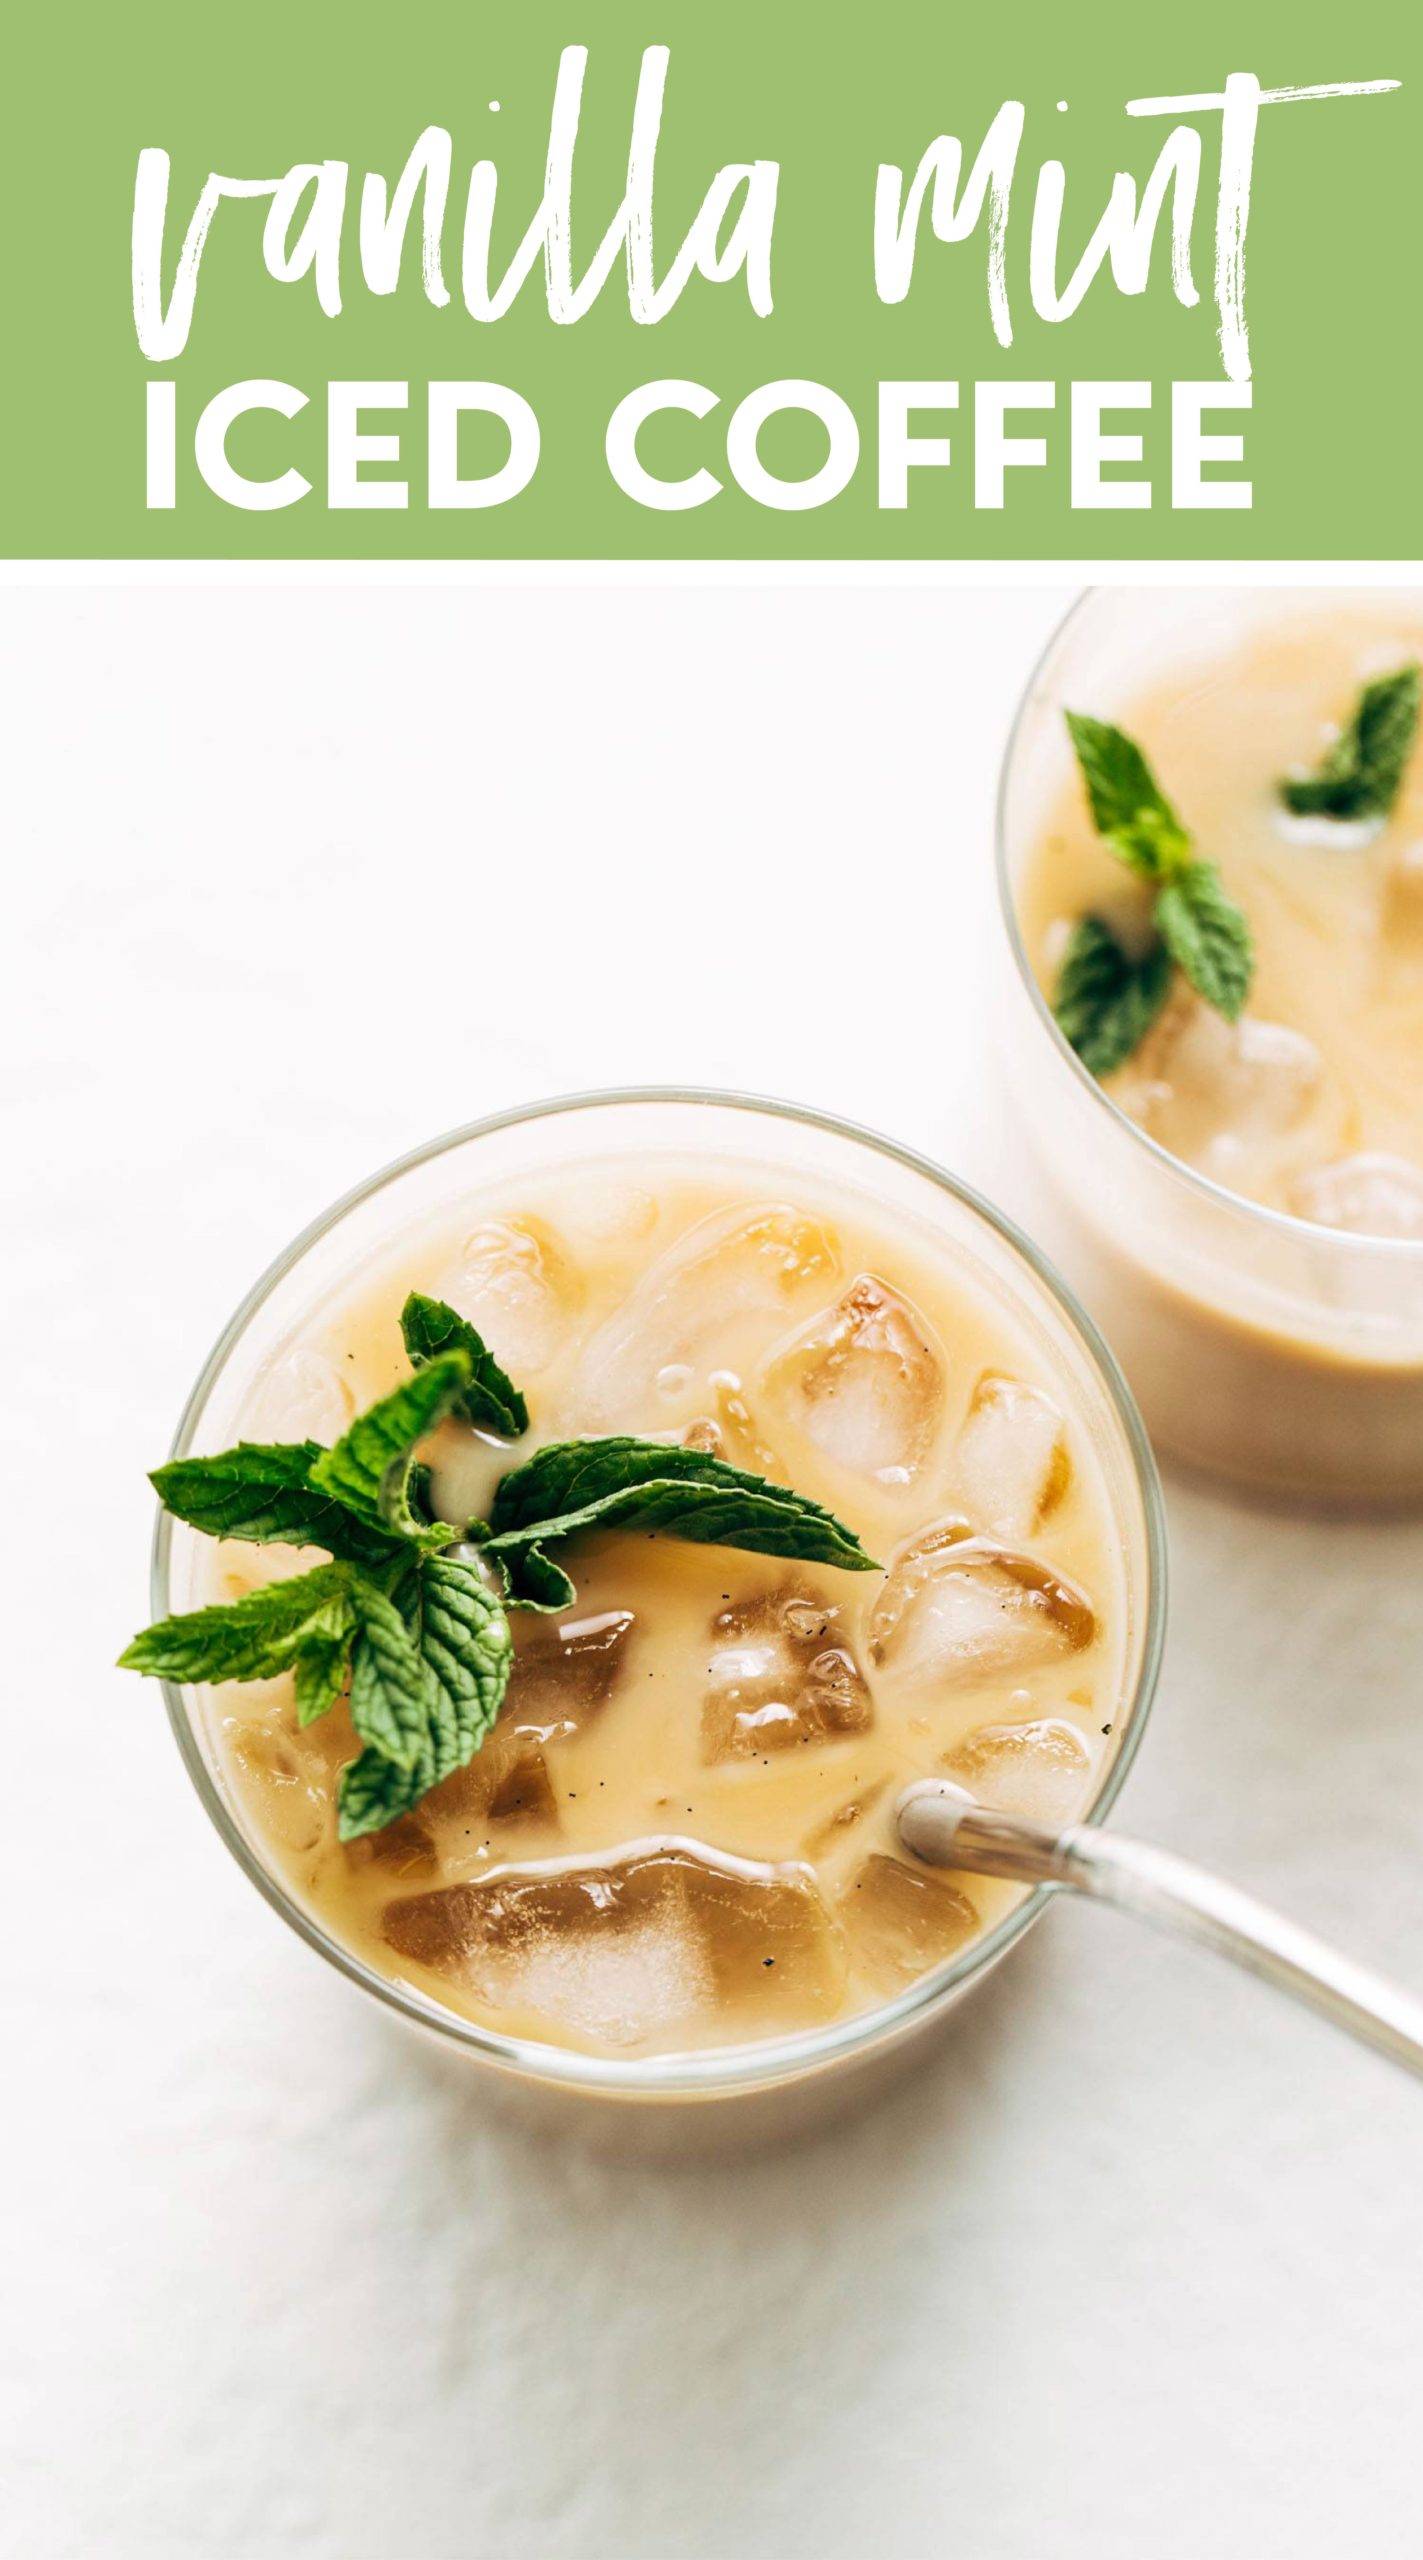 Clear glass with ice cubes, creamy vanilla coffee, and a fresh bundle of mint floating atop next to a silver spoon.